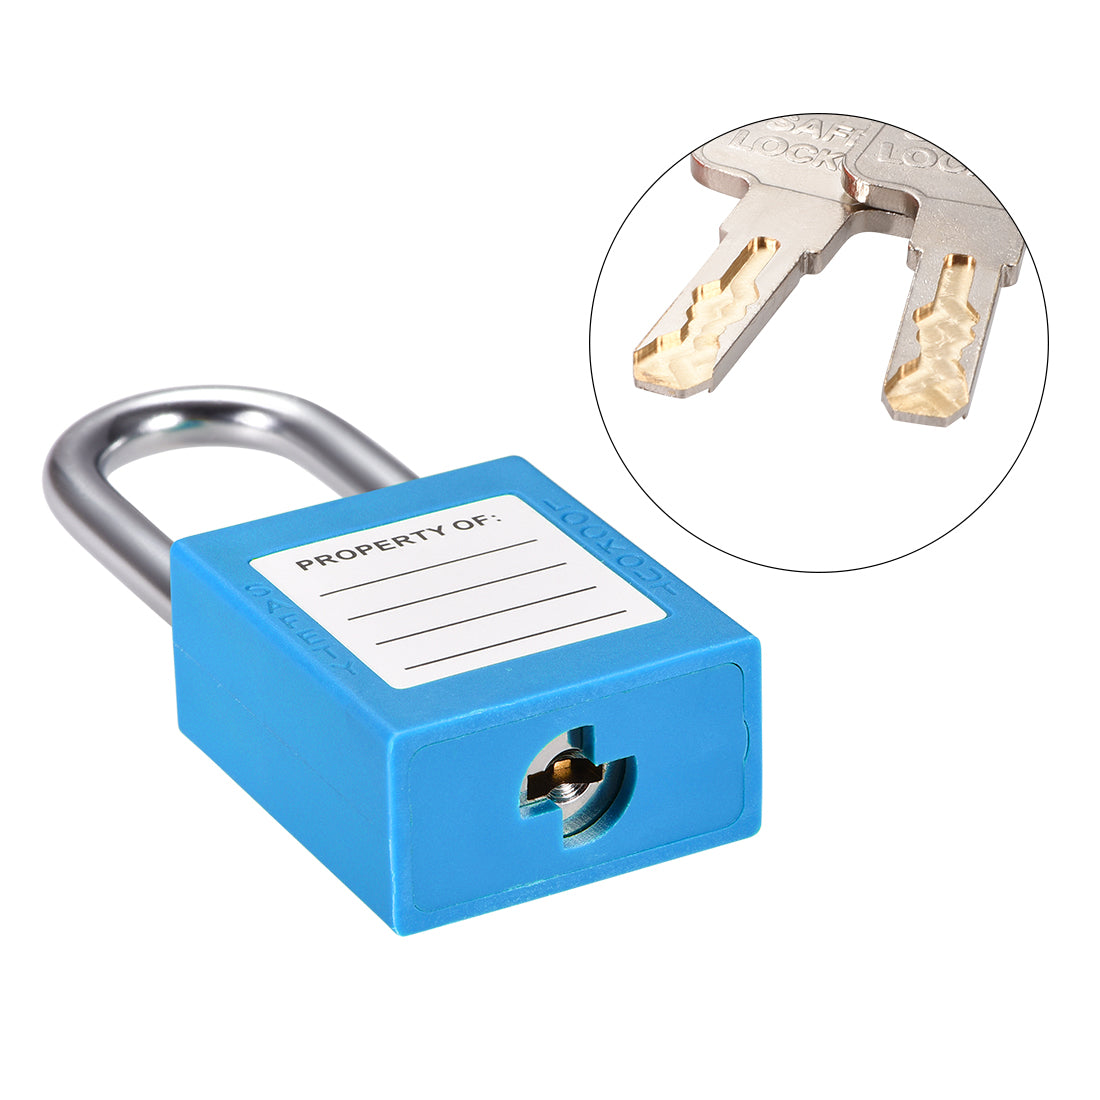 uxcell Uxcell Lockout Tagout Safety Padlock 38mm Steel Shackle Keyed Different Blue